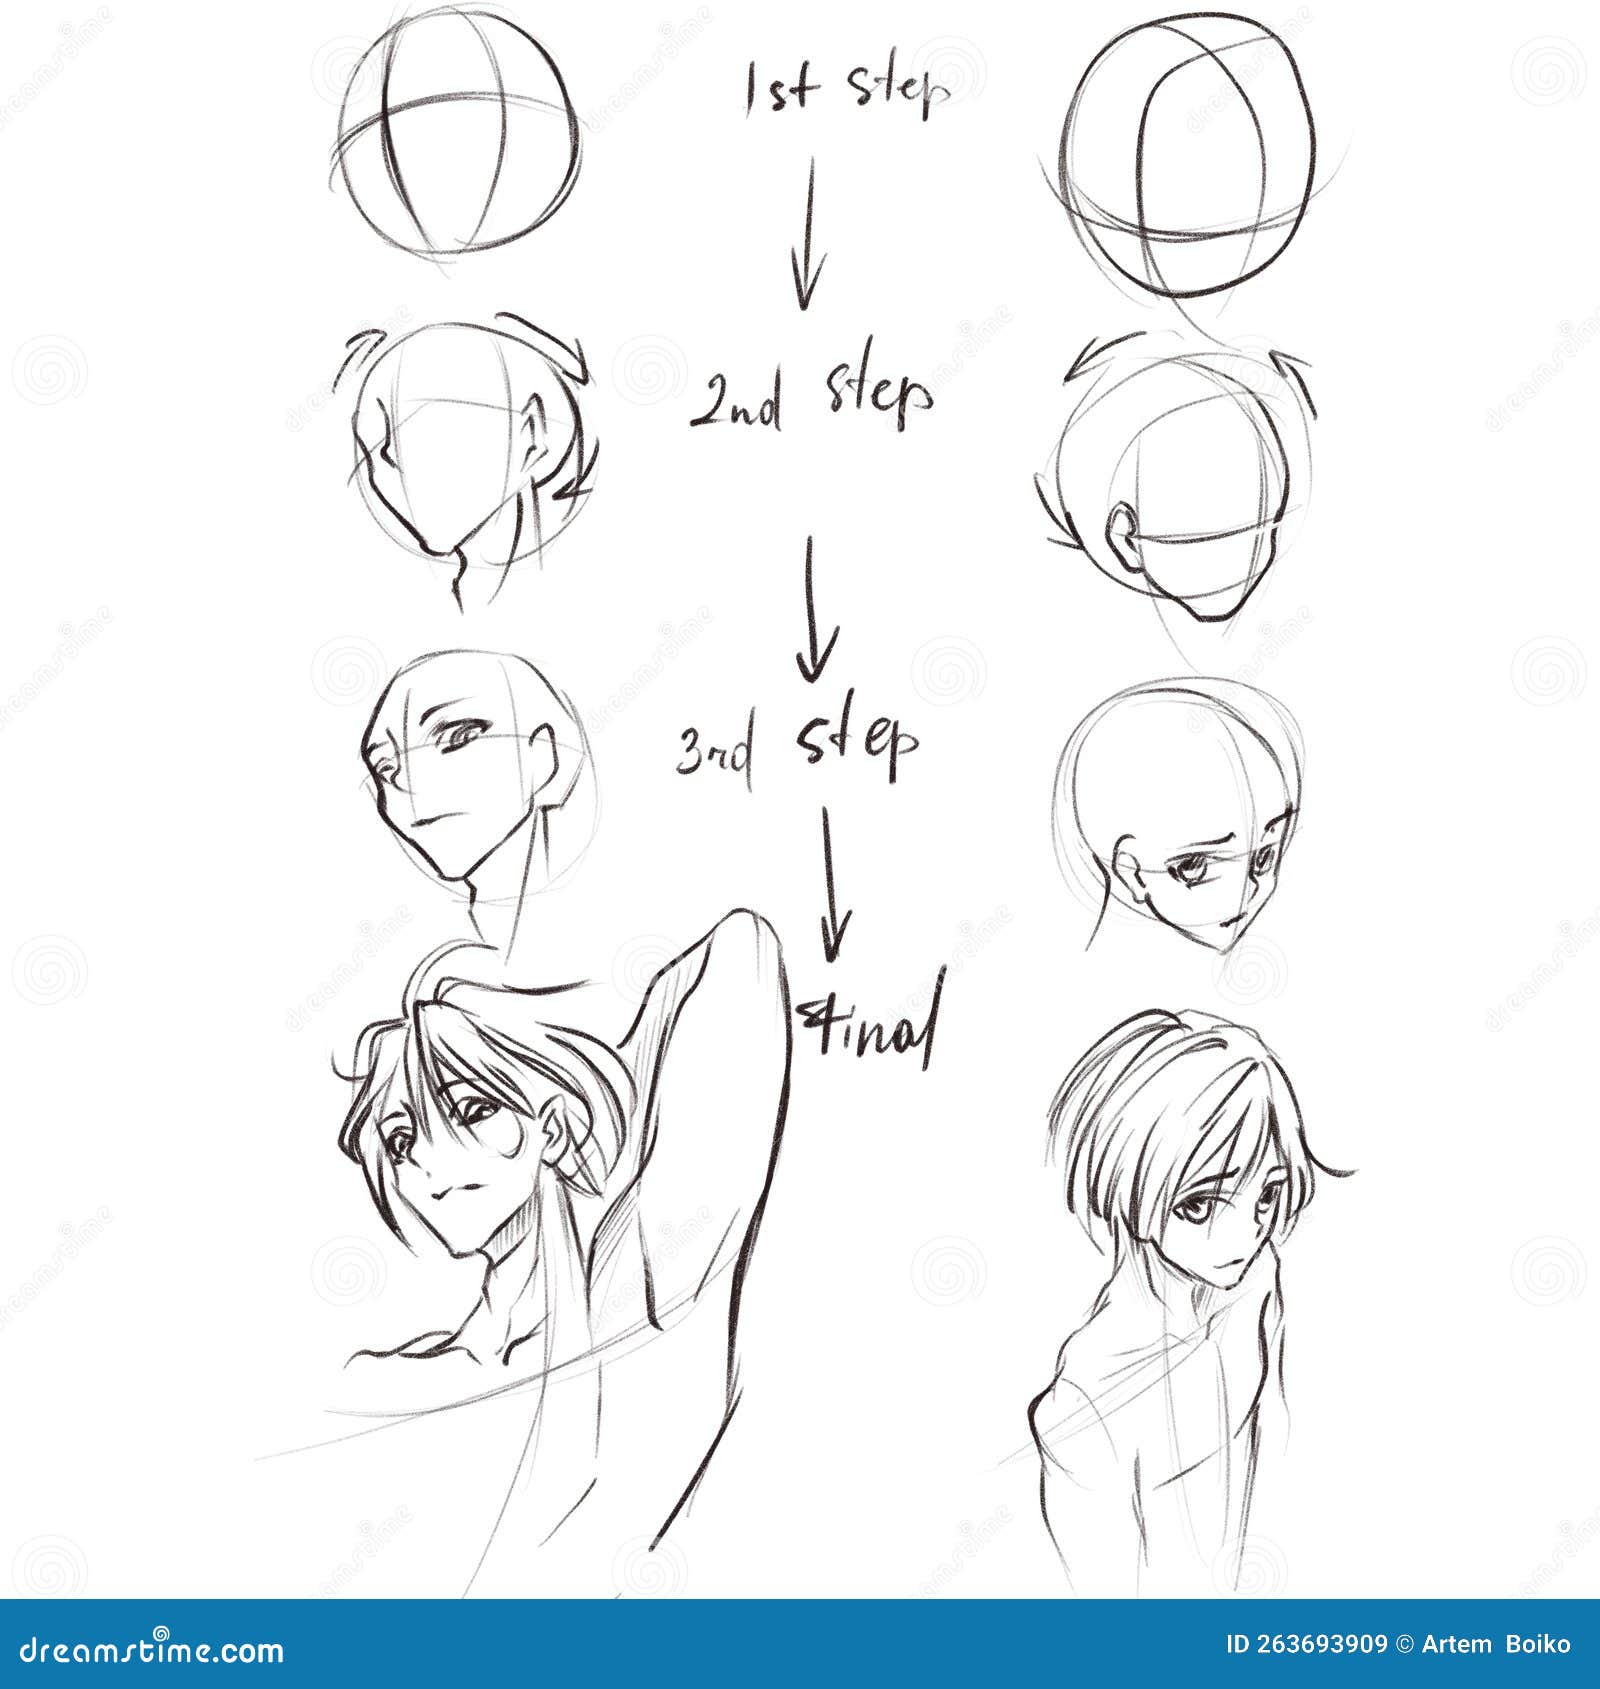 How to Draw an Anime Face